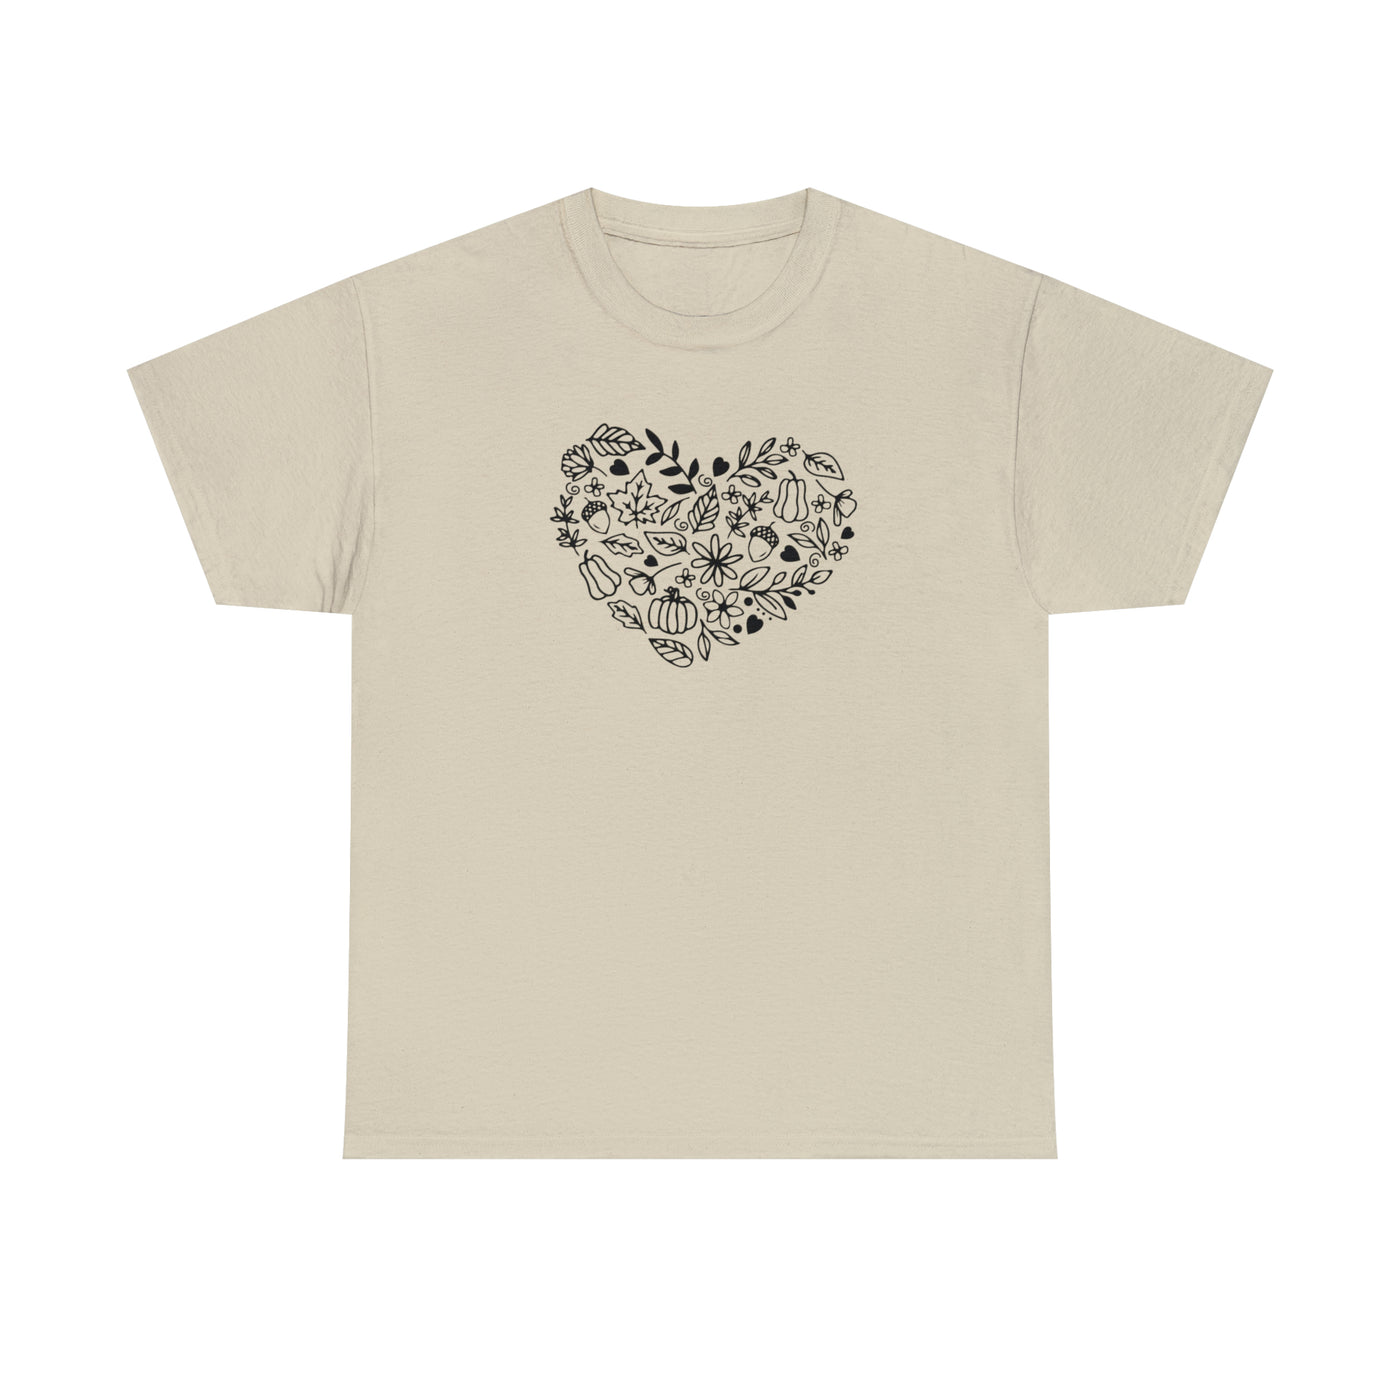 Heart Printed T-Shirts | Unisex Printed Tee | Let's Travel